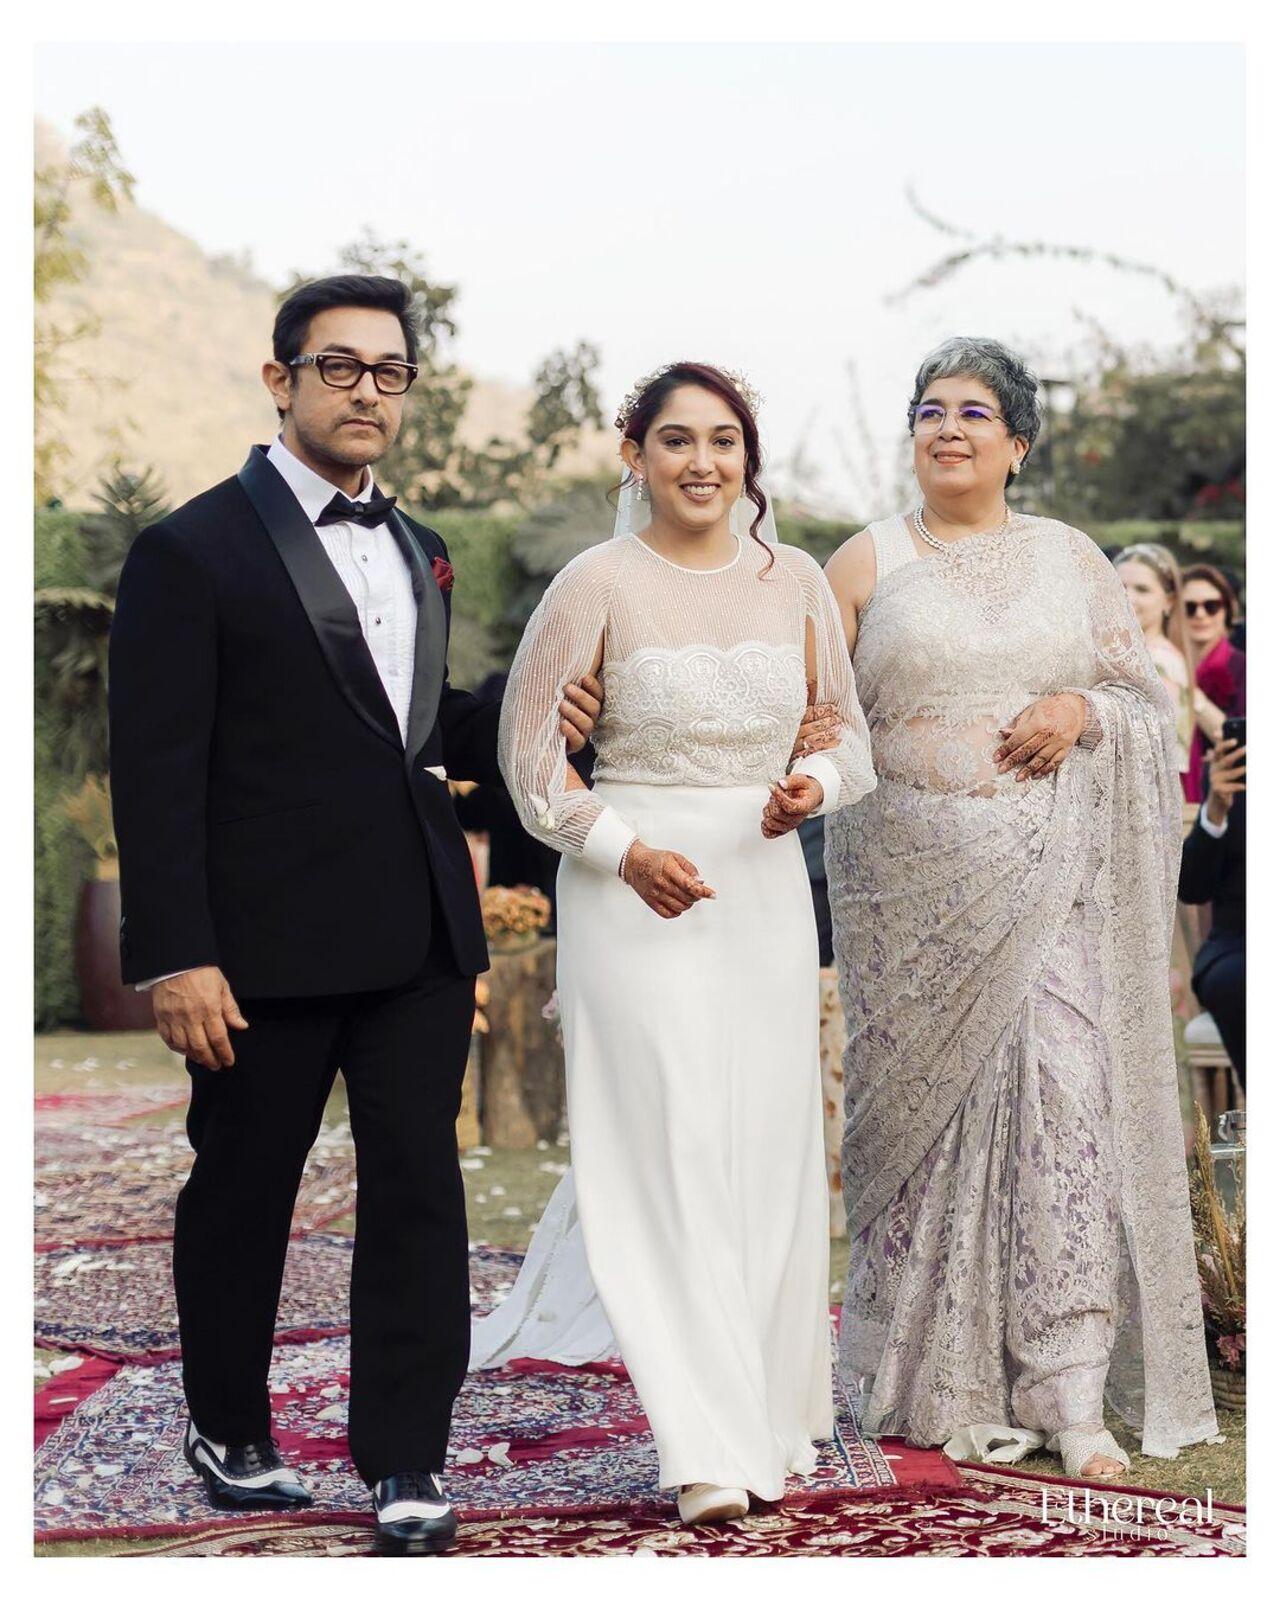 Ira Khan was walked down the aisle by her parents- Aamir Khan and Reena Dutta